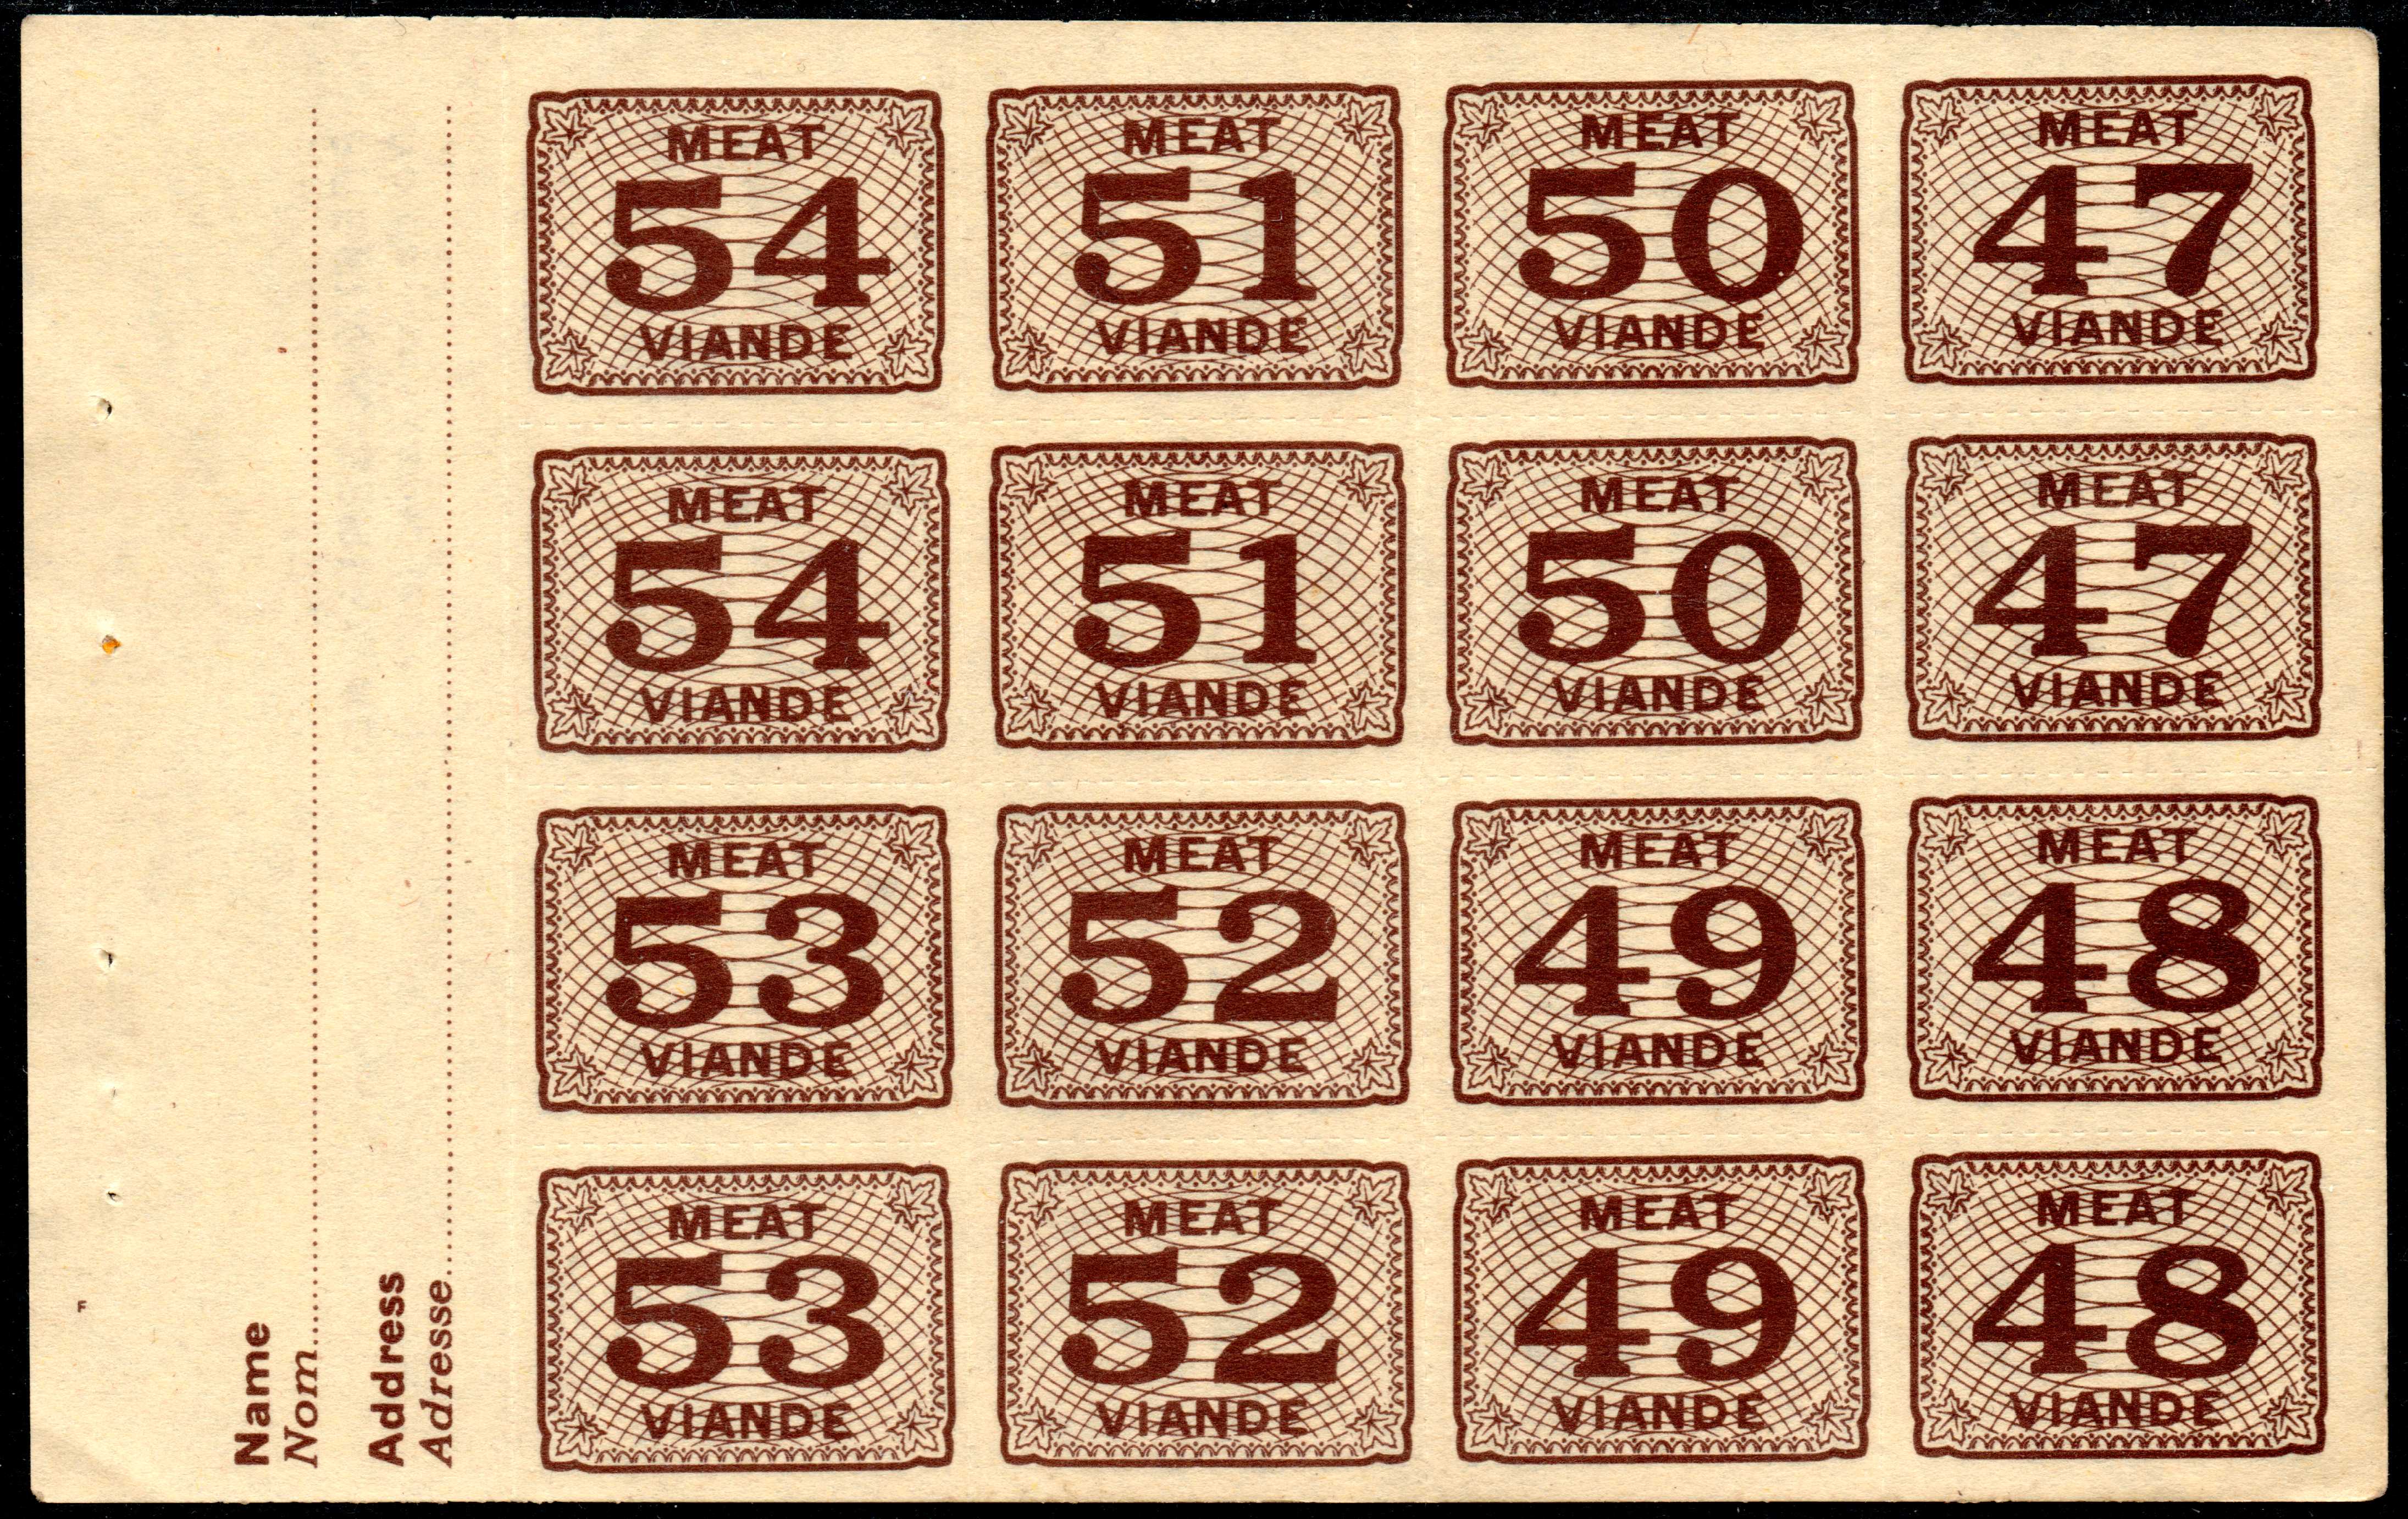 Canada meat ration stamps circa 1943